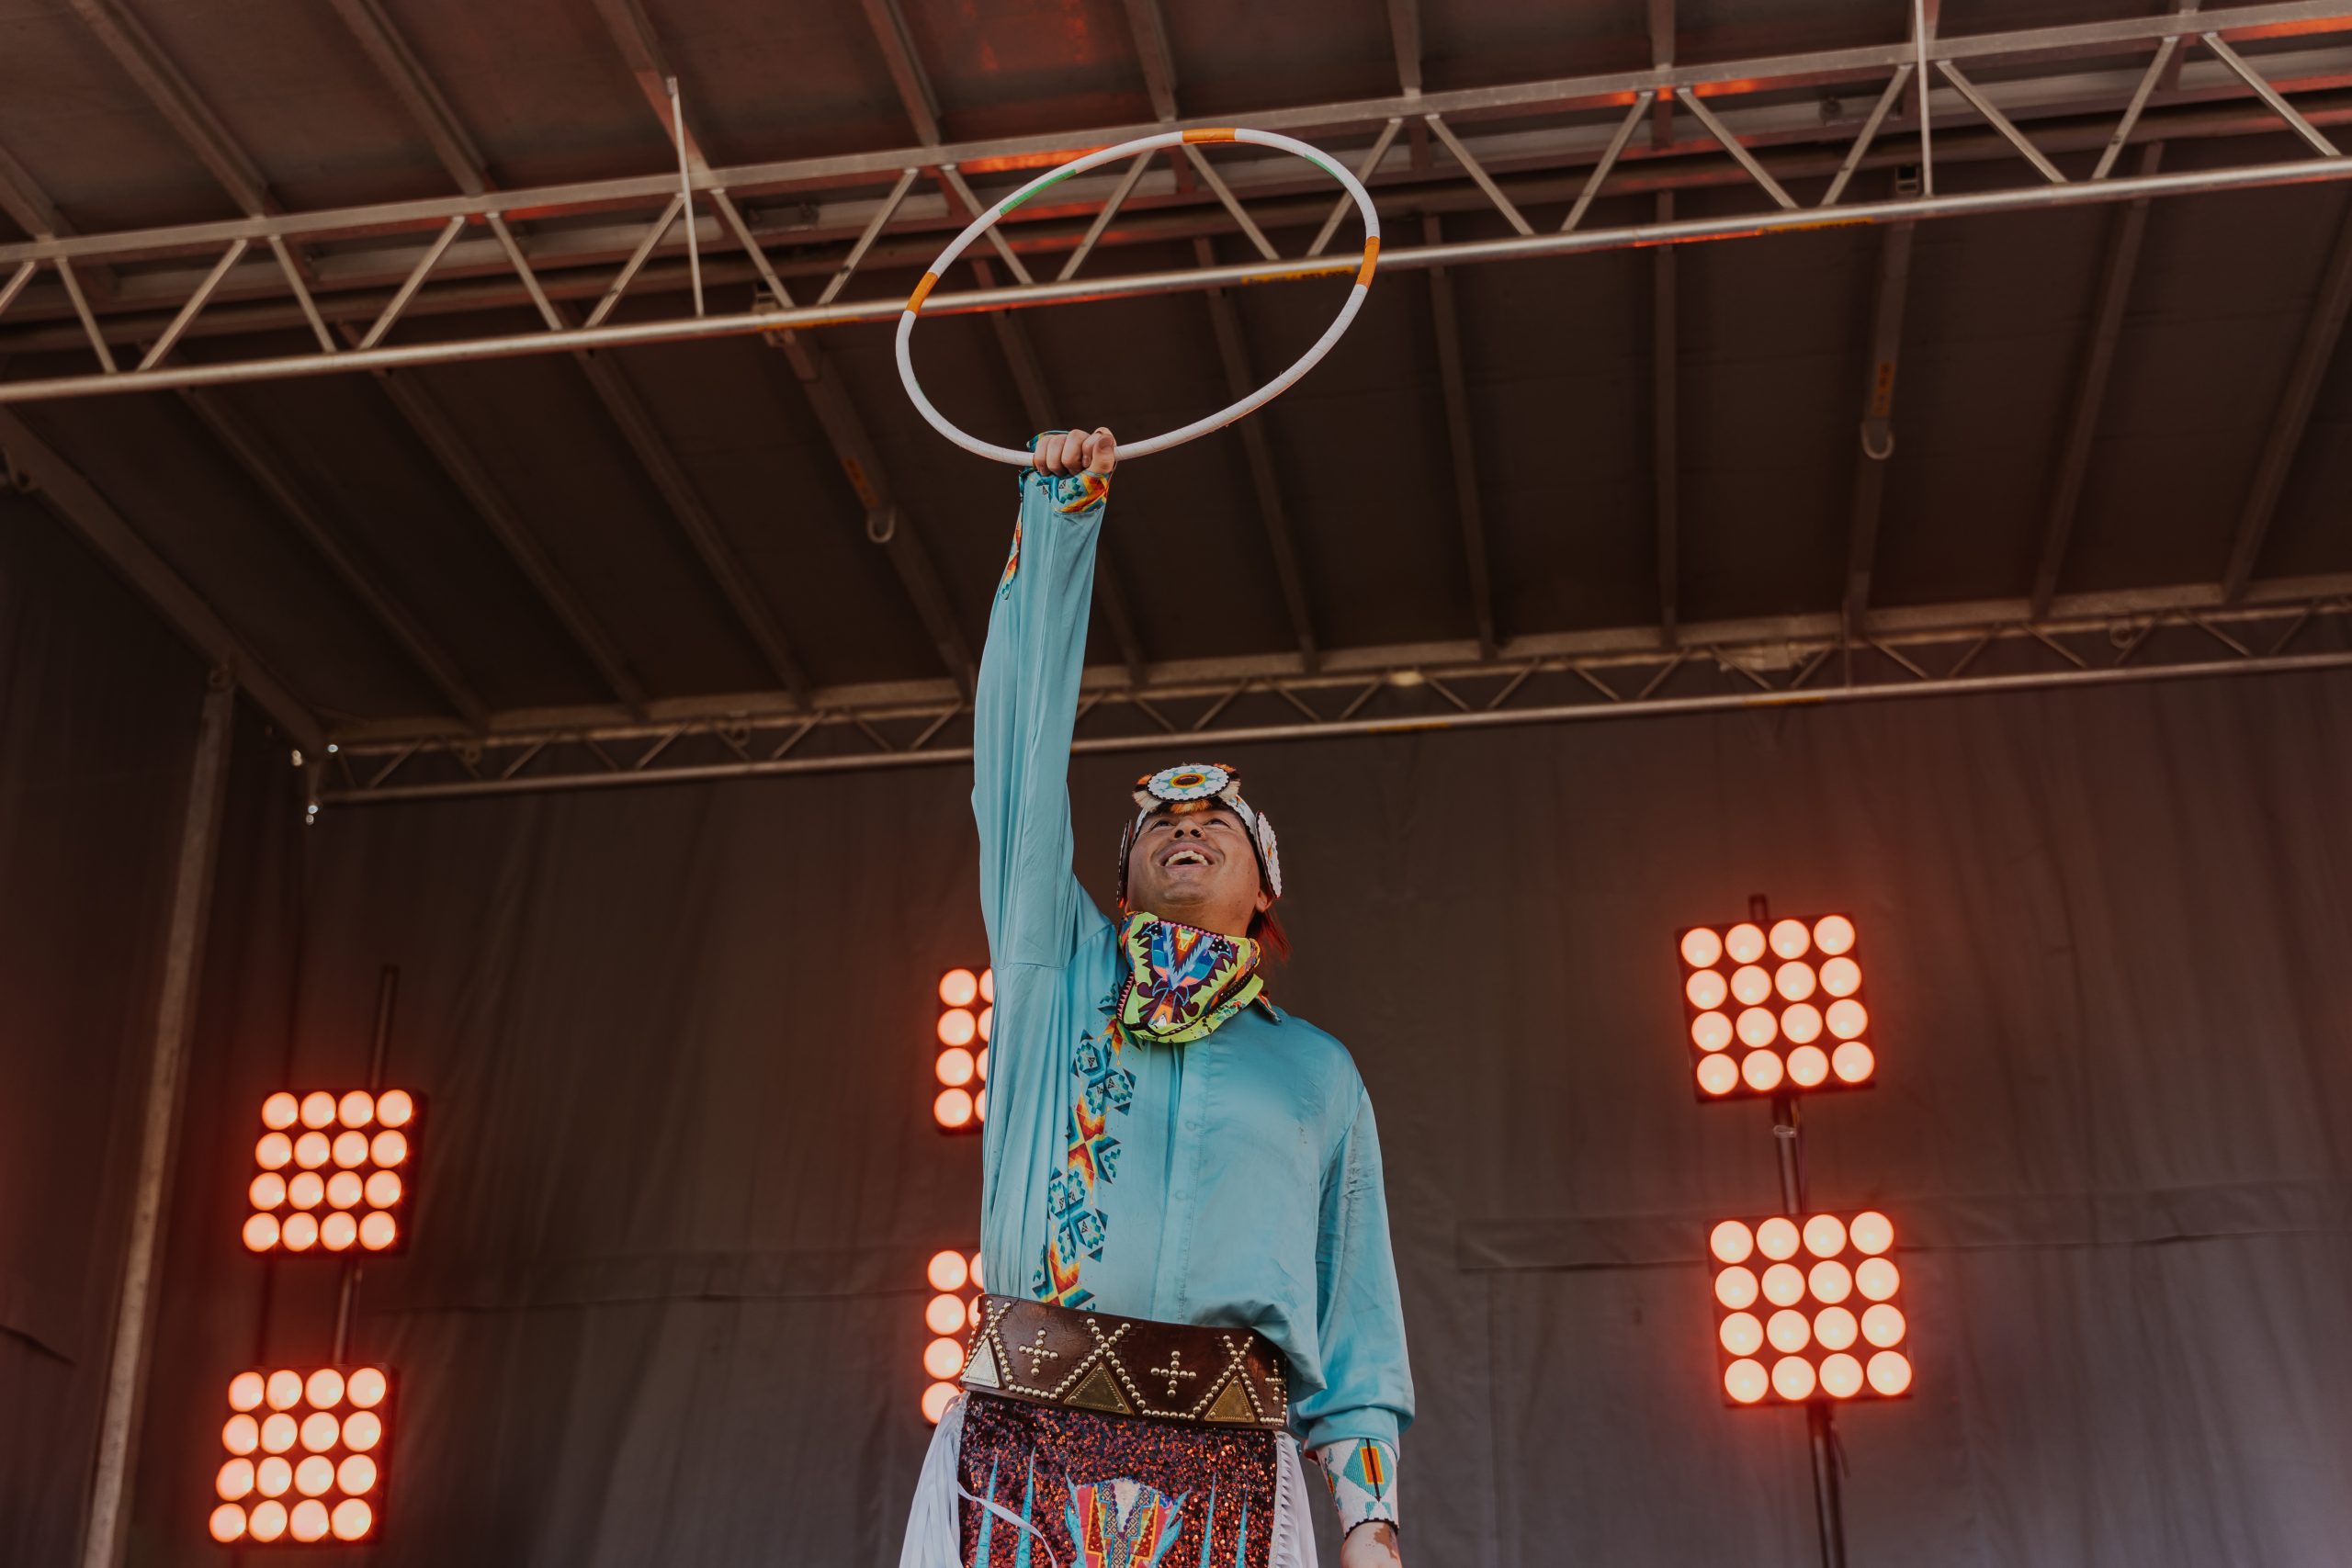 Notorious Cree at Victoria Function Festival, photo by Andy Wang.